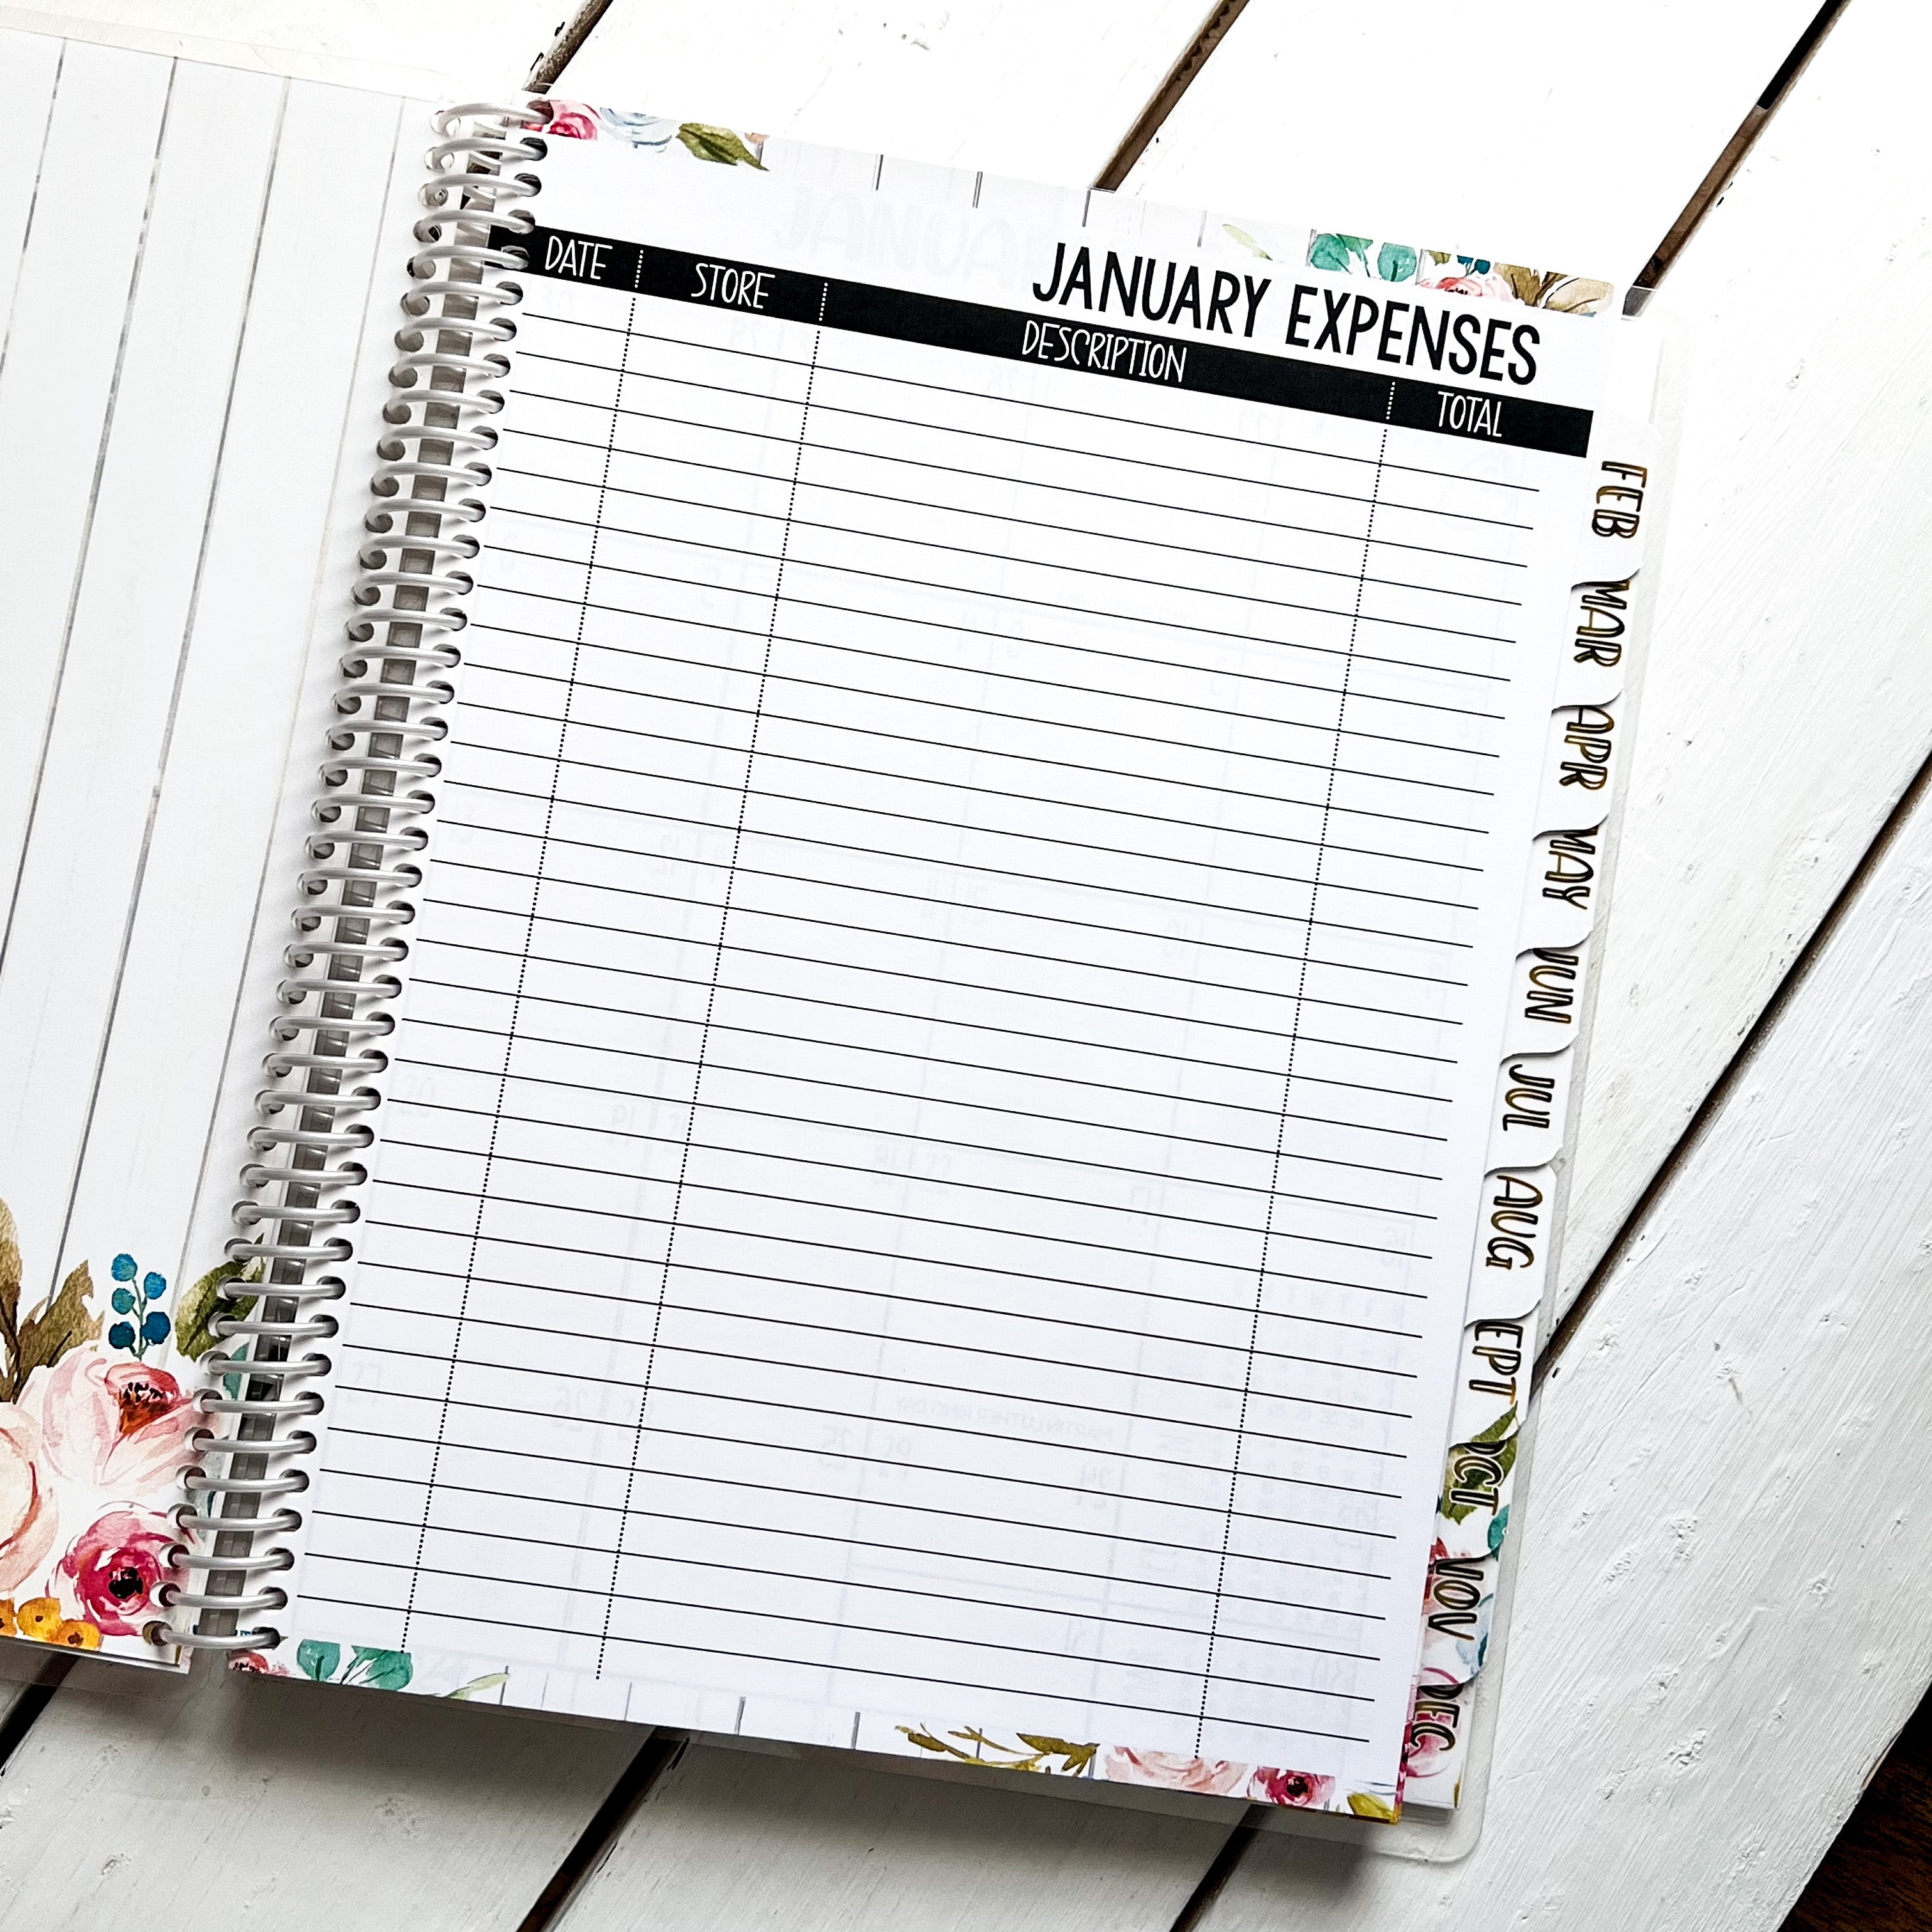 Sales Tracker Appointment Book - FLORAL BOBBY PIN